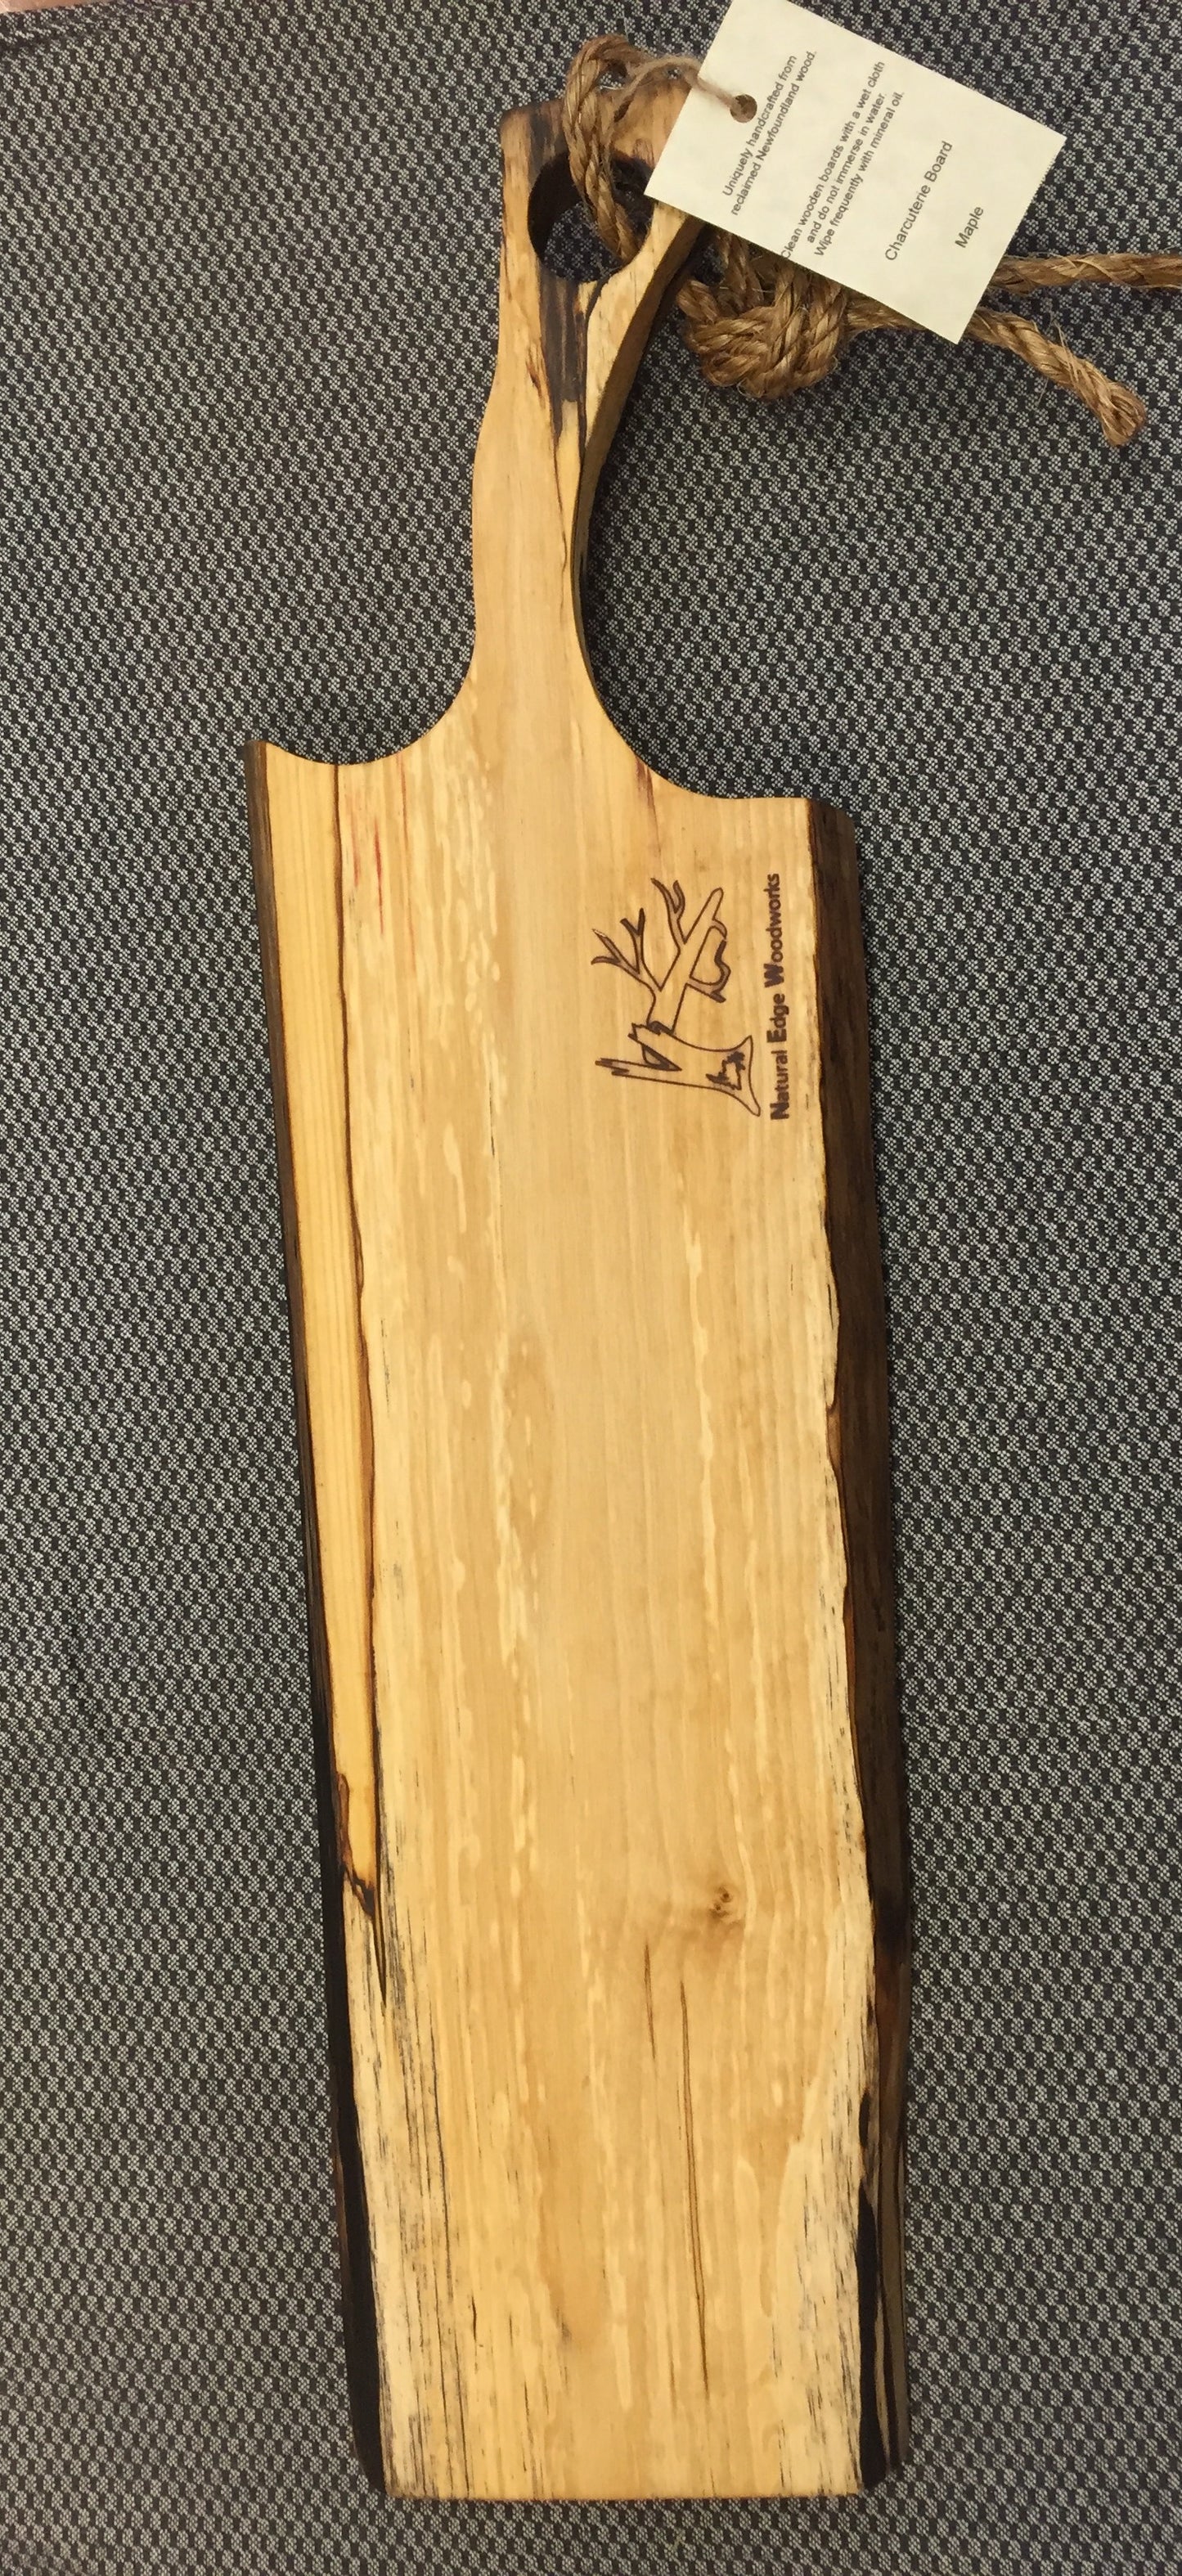 Natural Edge Serving Boards Made from Salvaged Newfoundland Wood